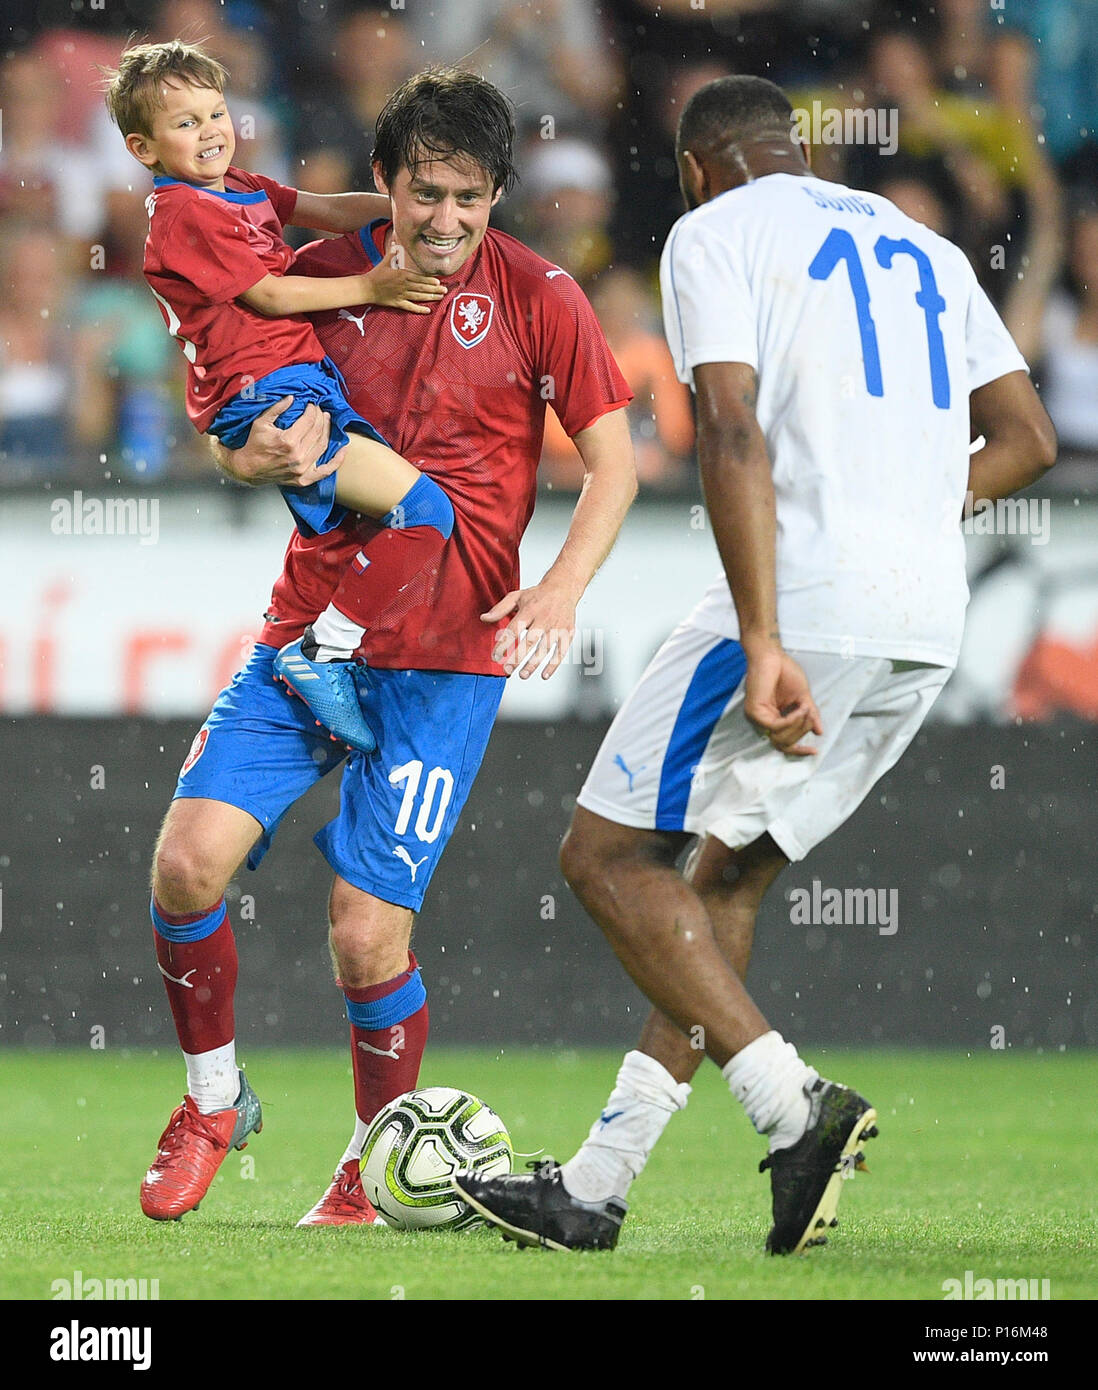 Tomas Rosicky and his son Tomas Rosicky Jr of Czech team and Alex Song of TR10 World Team in action during the match. Former captain of the Czech national football team Tomas Rosicky definitely ended his career at the age of 37 in a farewell match played despite a driving cloudburst which postponed its kickoff today, on Saturday, June 9, 2018. The Czech team, in which he played, defeated the 'team of the world,' composed of his former fellow players from Borussia Dortmund and Arsenal London, 5-2. The final goal was scored by Rosicky's four-year-old son Tomas. Weather complicated the farewell m Stock Photo